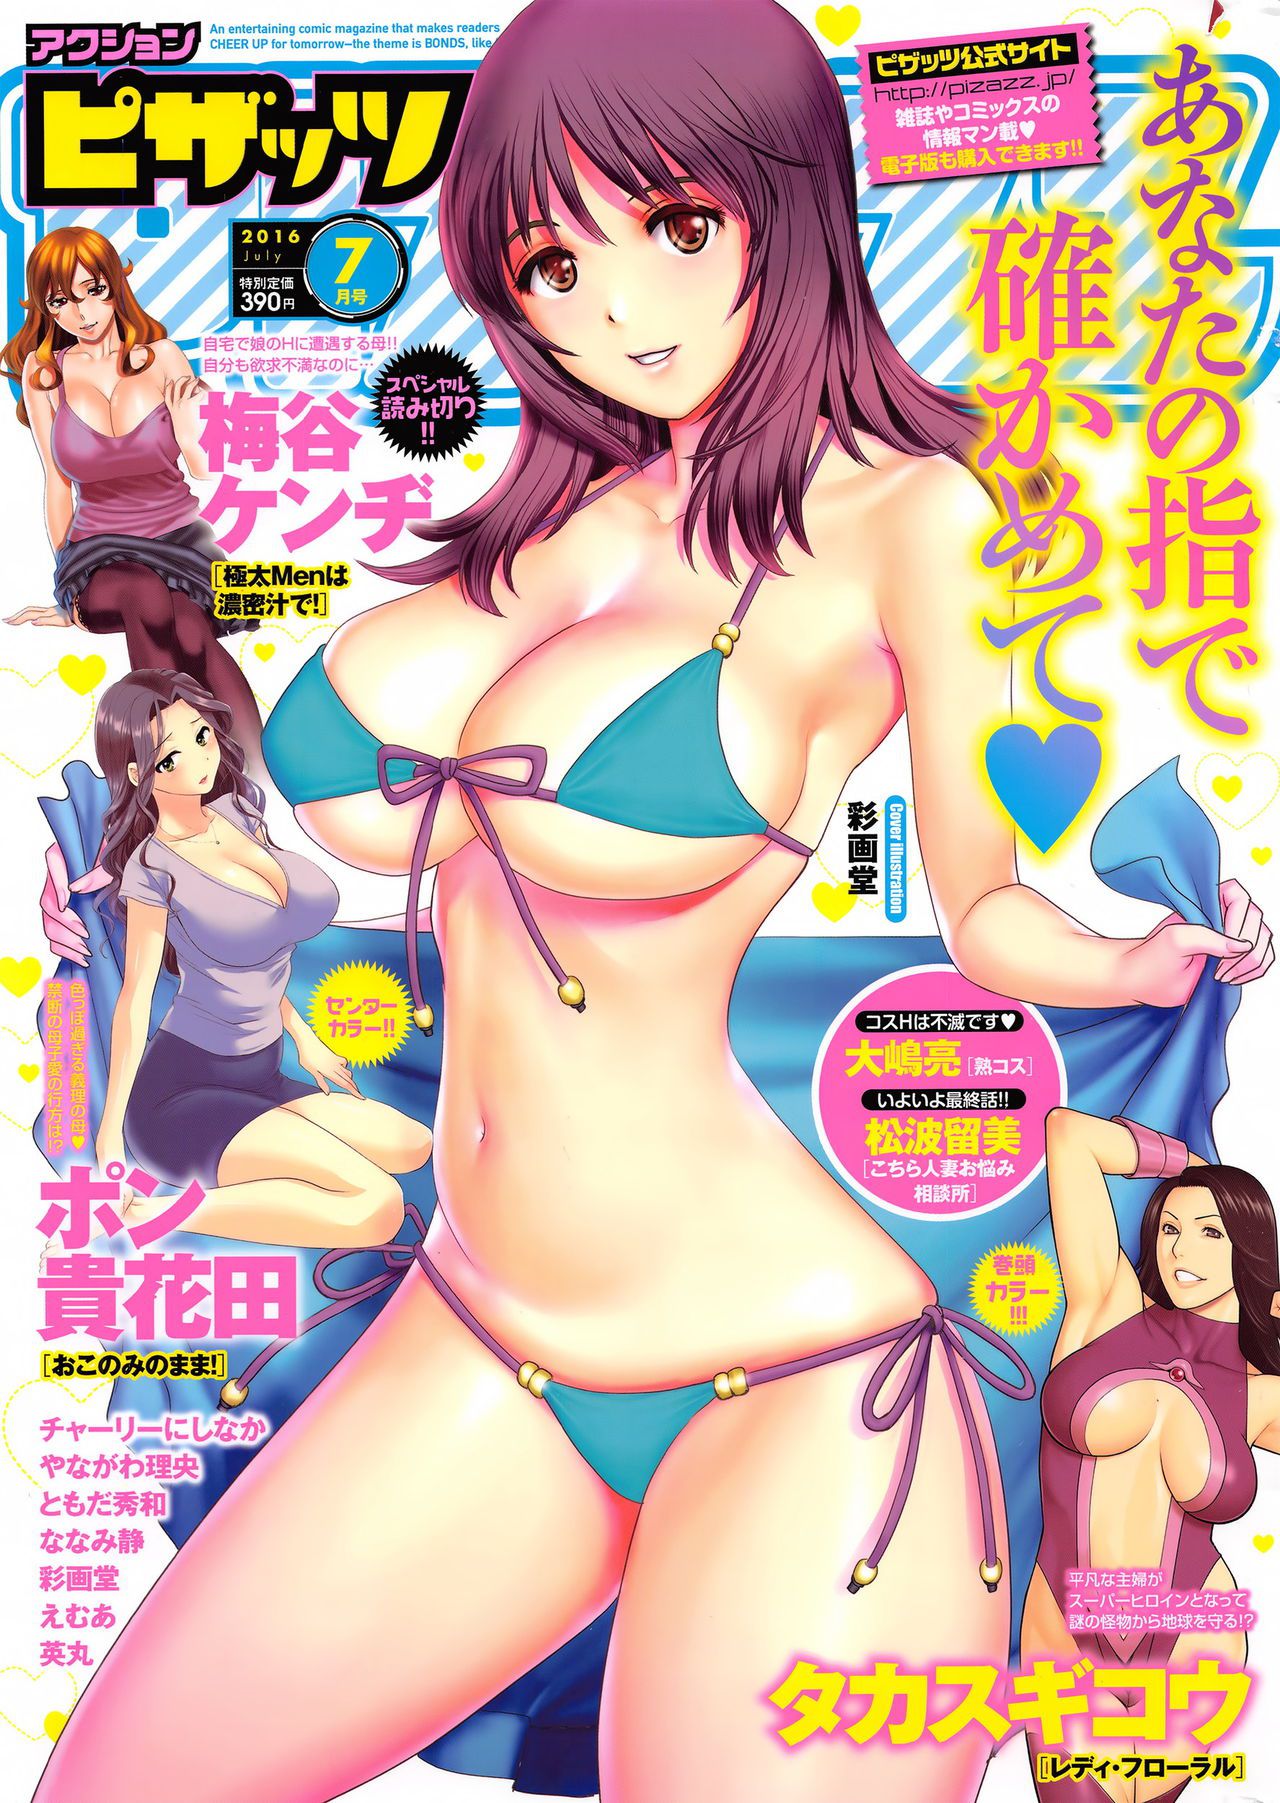 [Saigado] Cover Illustrations [彩画堂] Cover Illustrations 102